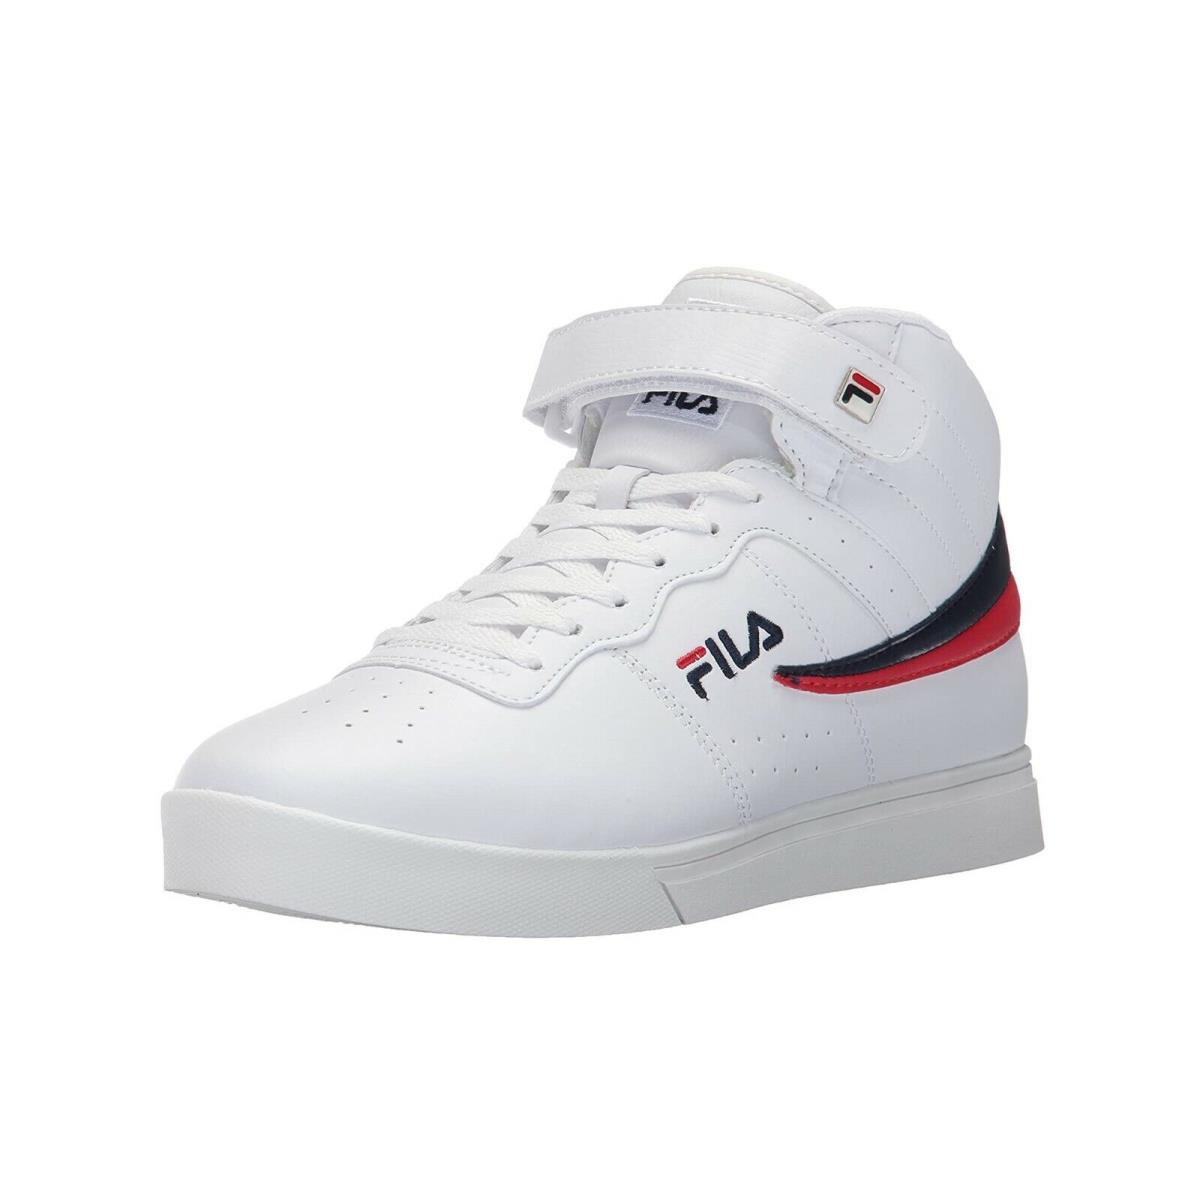 Fila Vulc 13 Men Shoes Leather White Navy Red High Top Sneakers